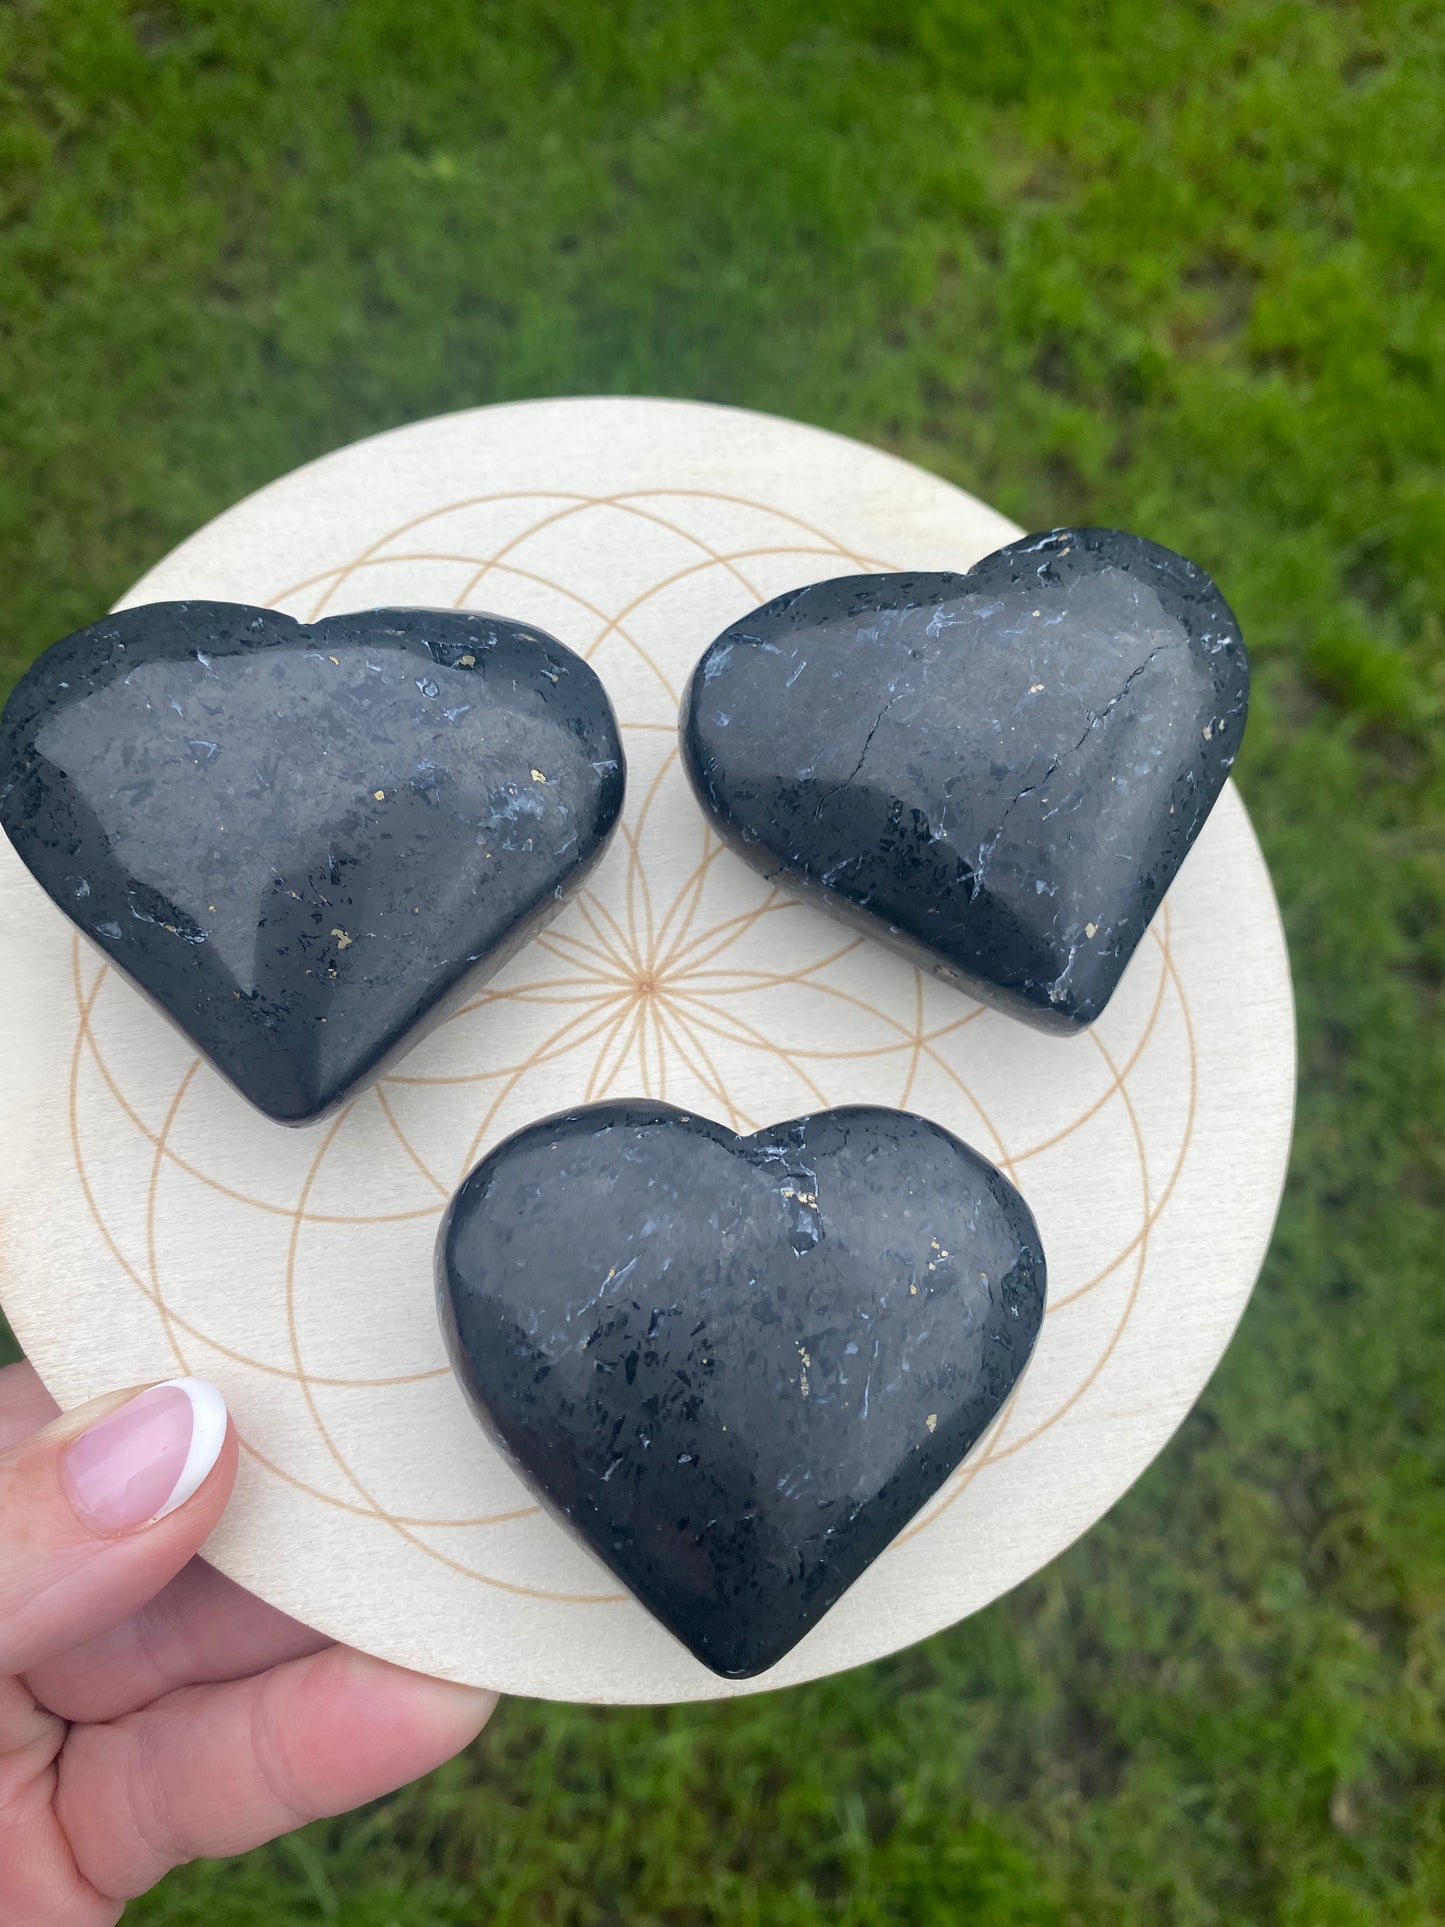 Shungite with pyrite hearts